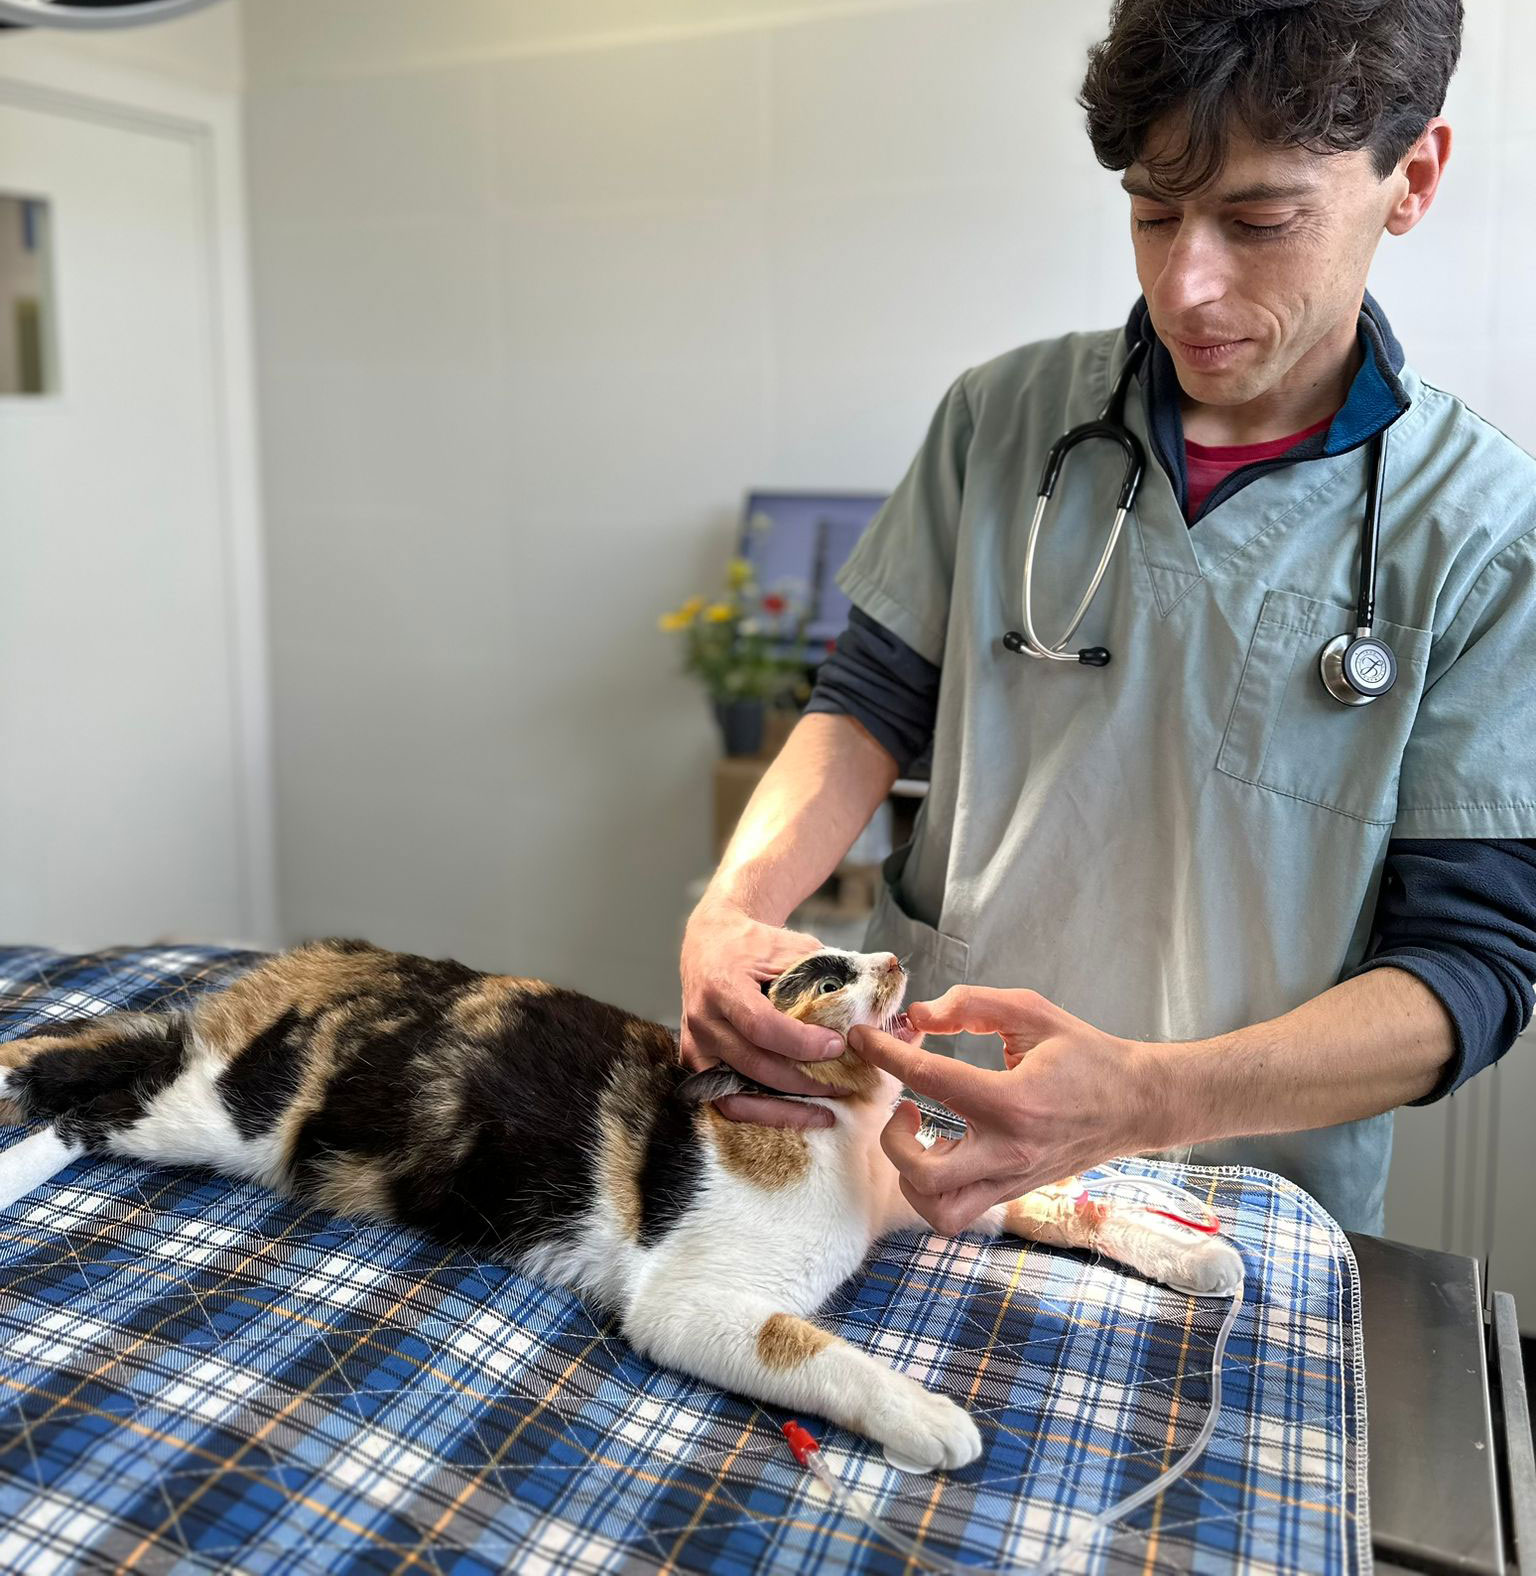 Dr. Ran Nivy, a principal investigator for one of the approved studies, examines a cat as part of his project.